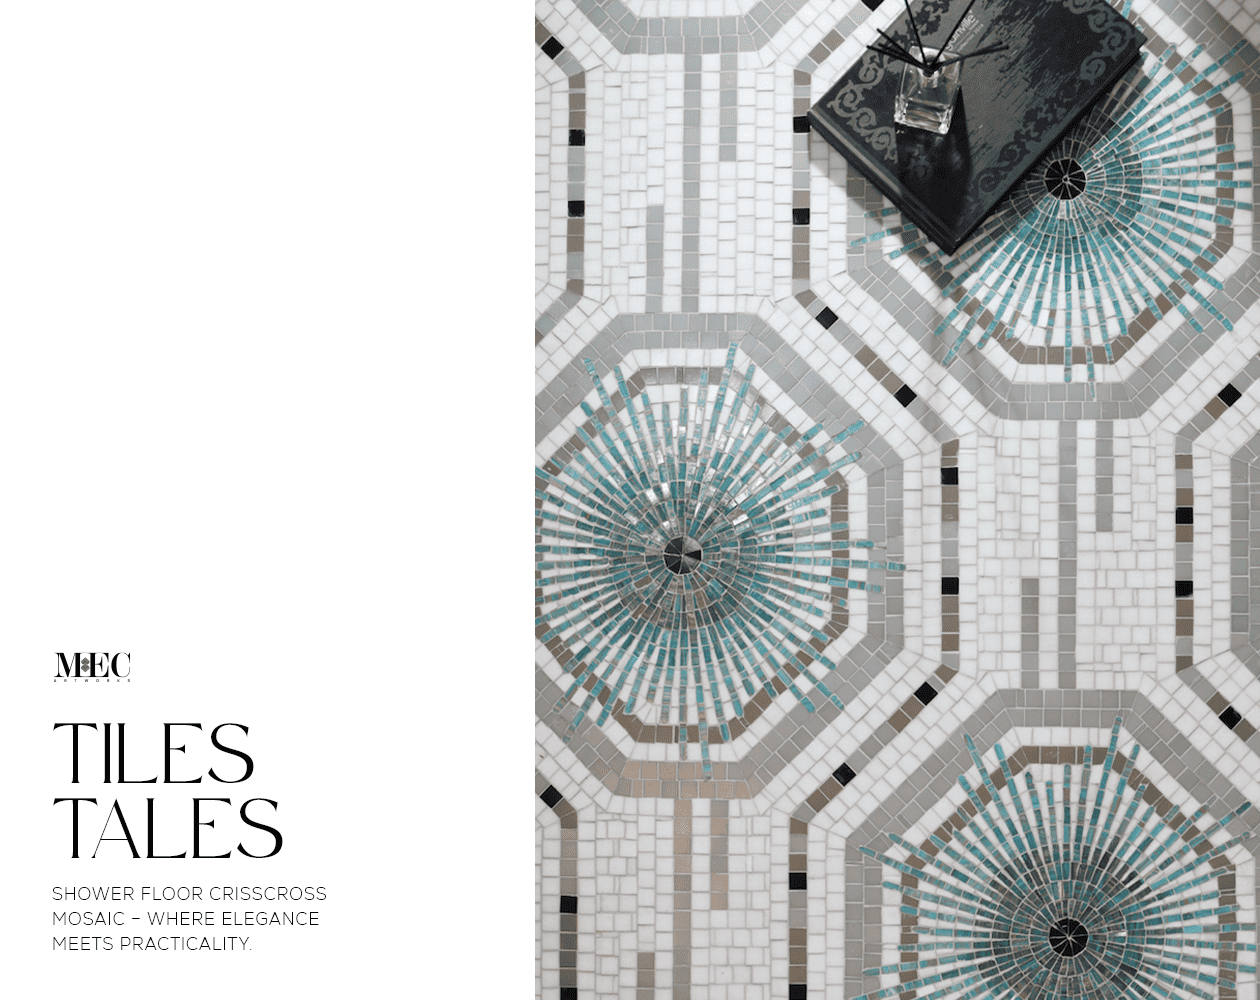 A detailed mosaic shower floor with intricate tile designs and a black table decoratively placed on it.